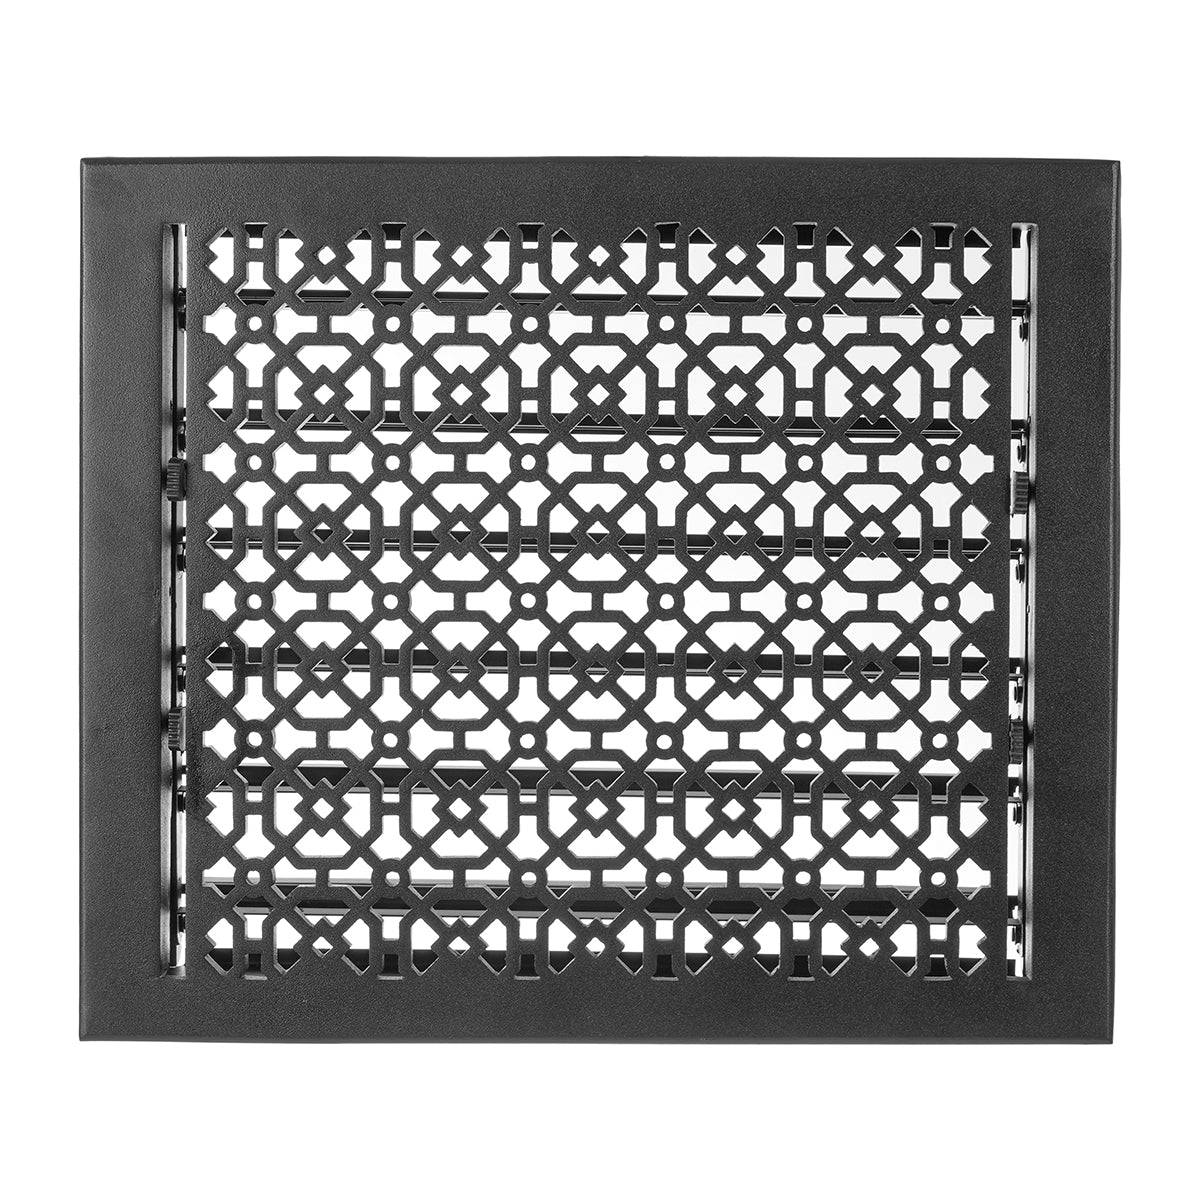 Achtek Air Supply Vent 12"x 14" Duct Opening (Overall 13-1/2"x 15-1/2"") Solid Cast Aluminium Register Cover | Powder Coated